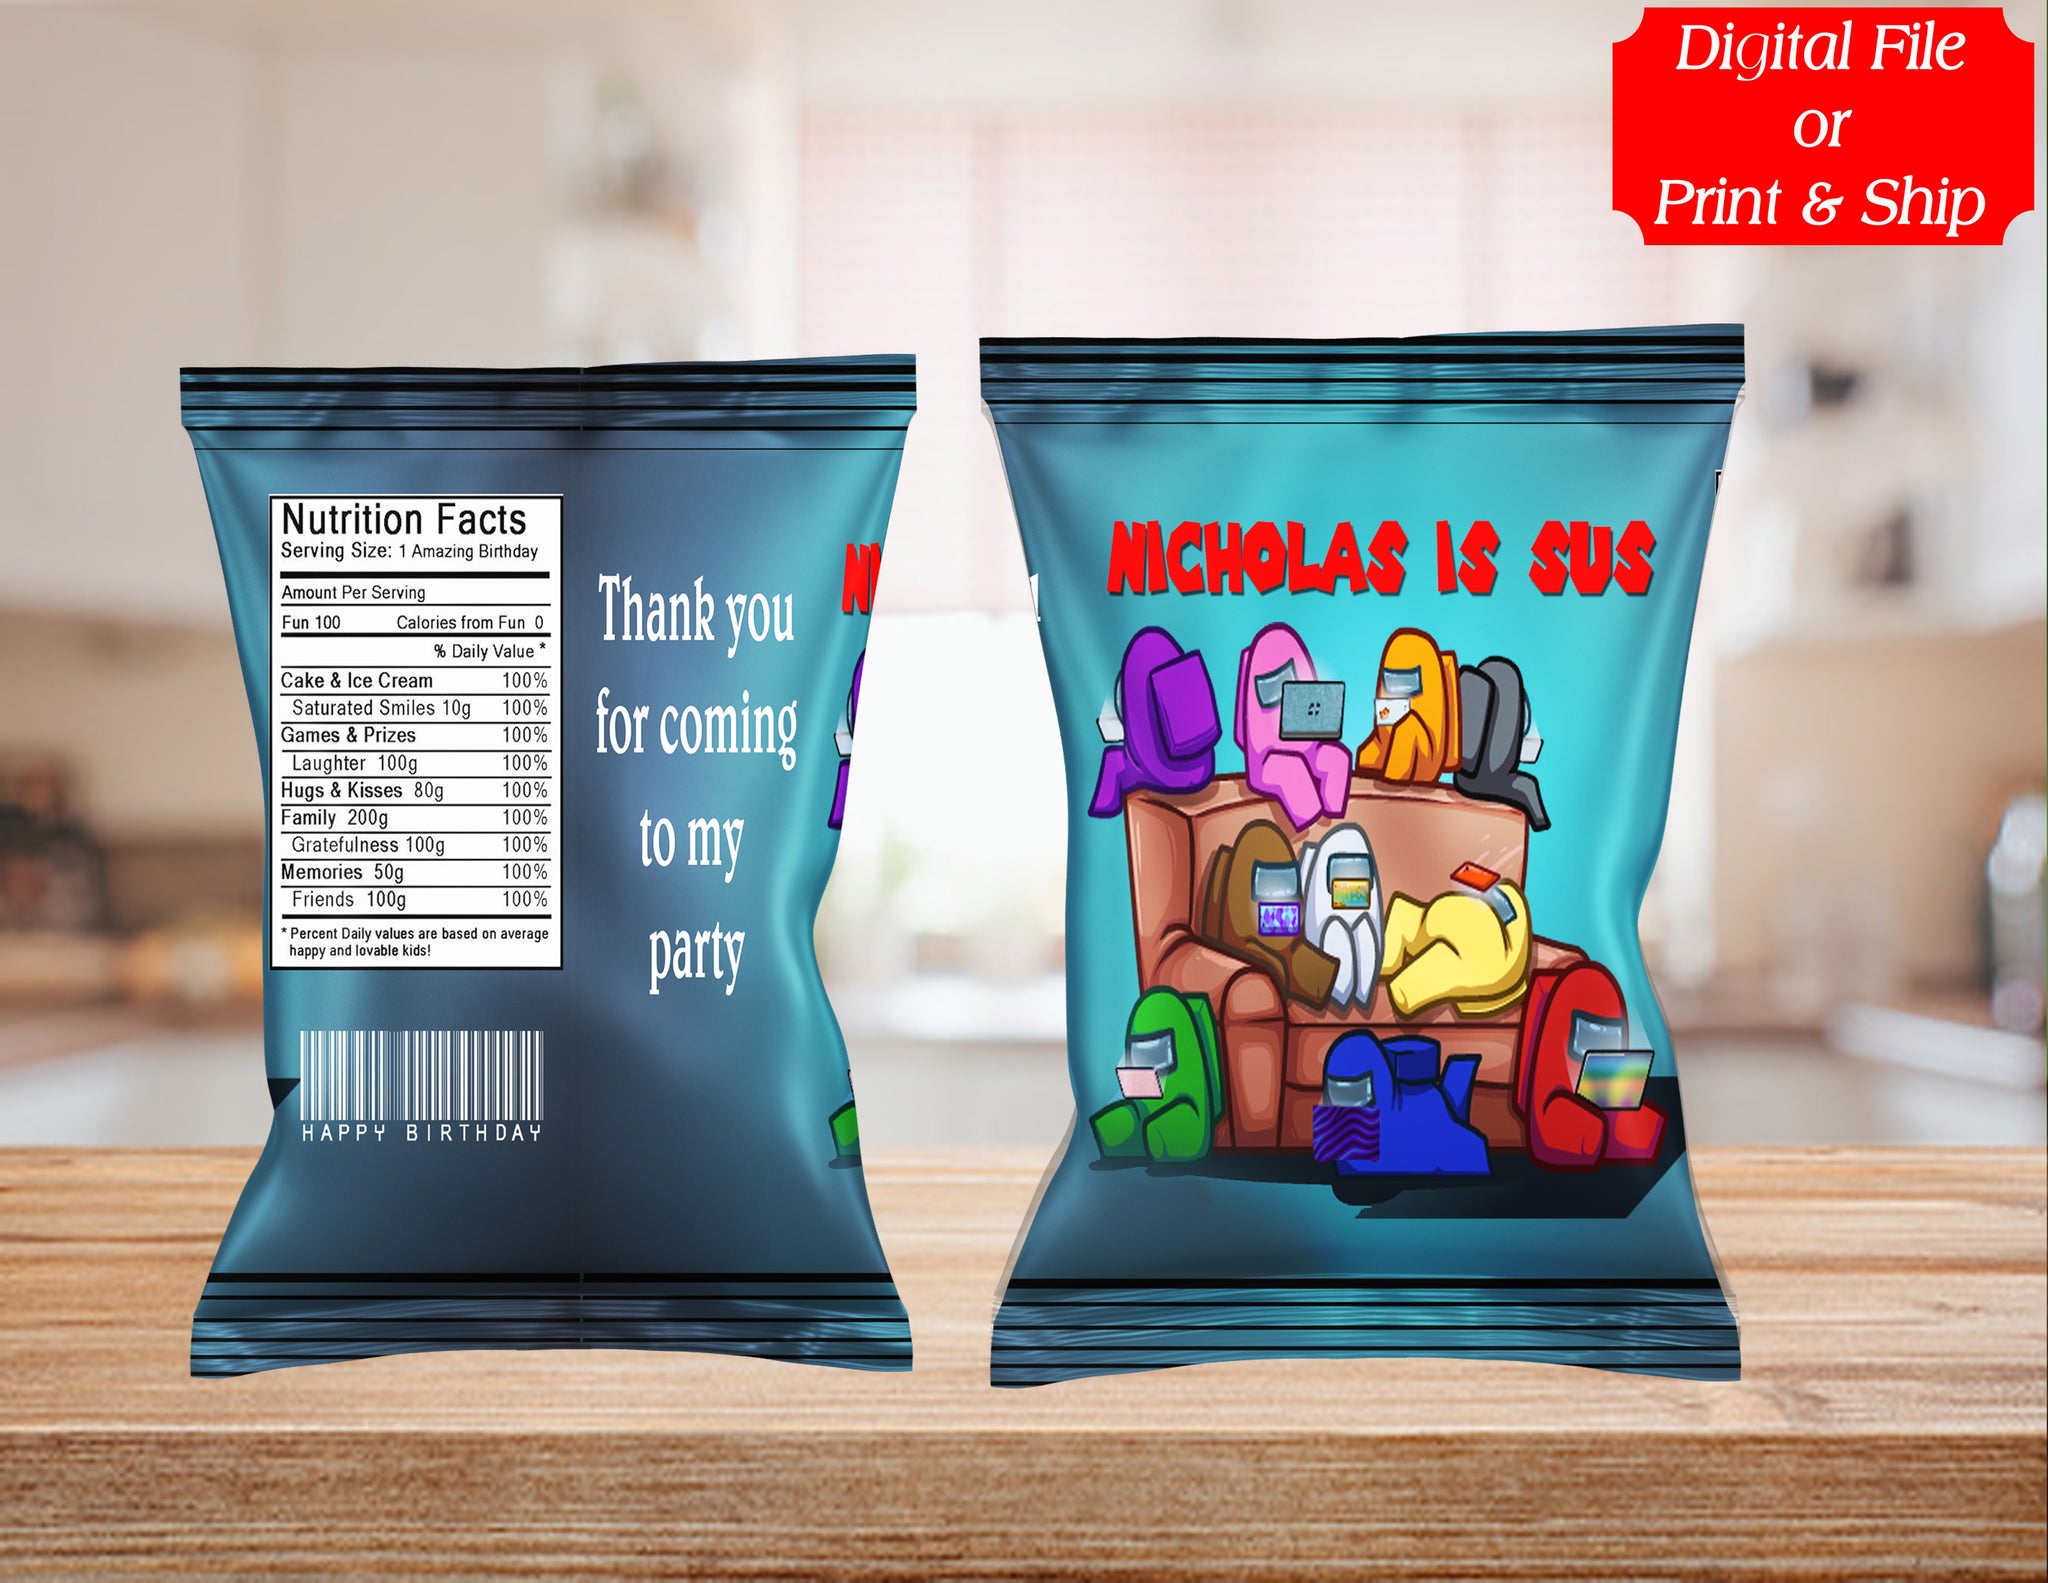 (12) Personalized AMONG US Chip Candy Treat Bags Party Favors Printed or D. File